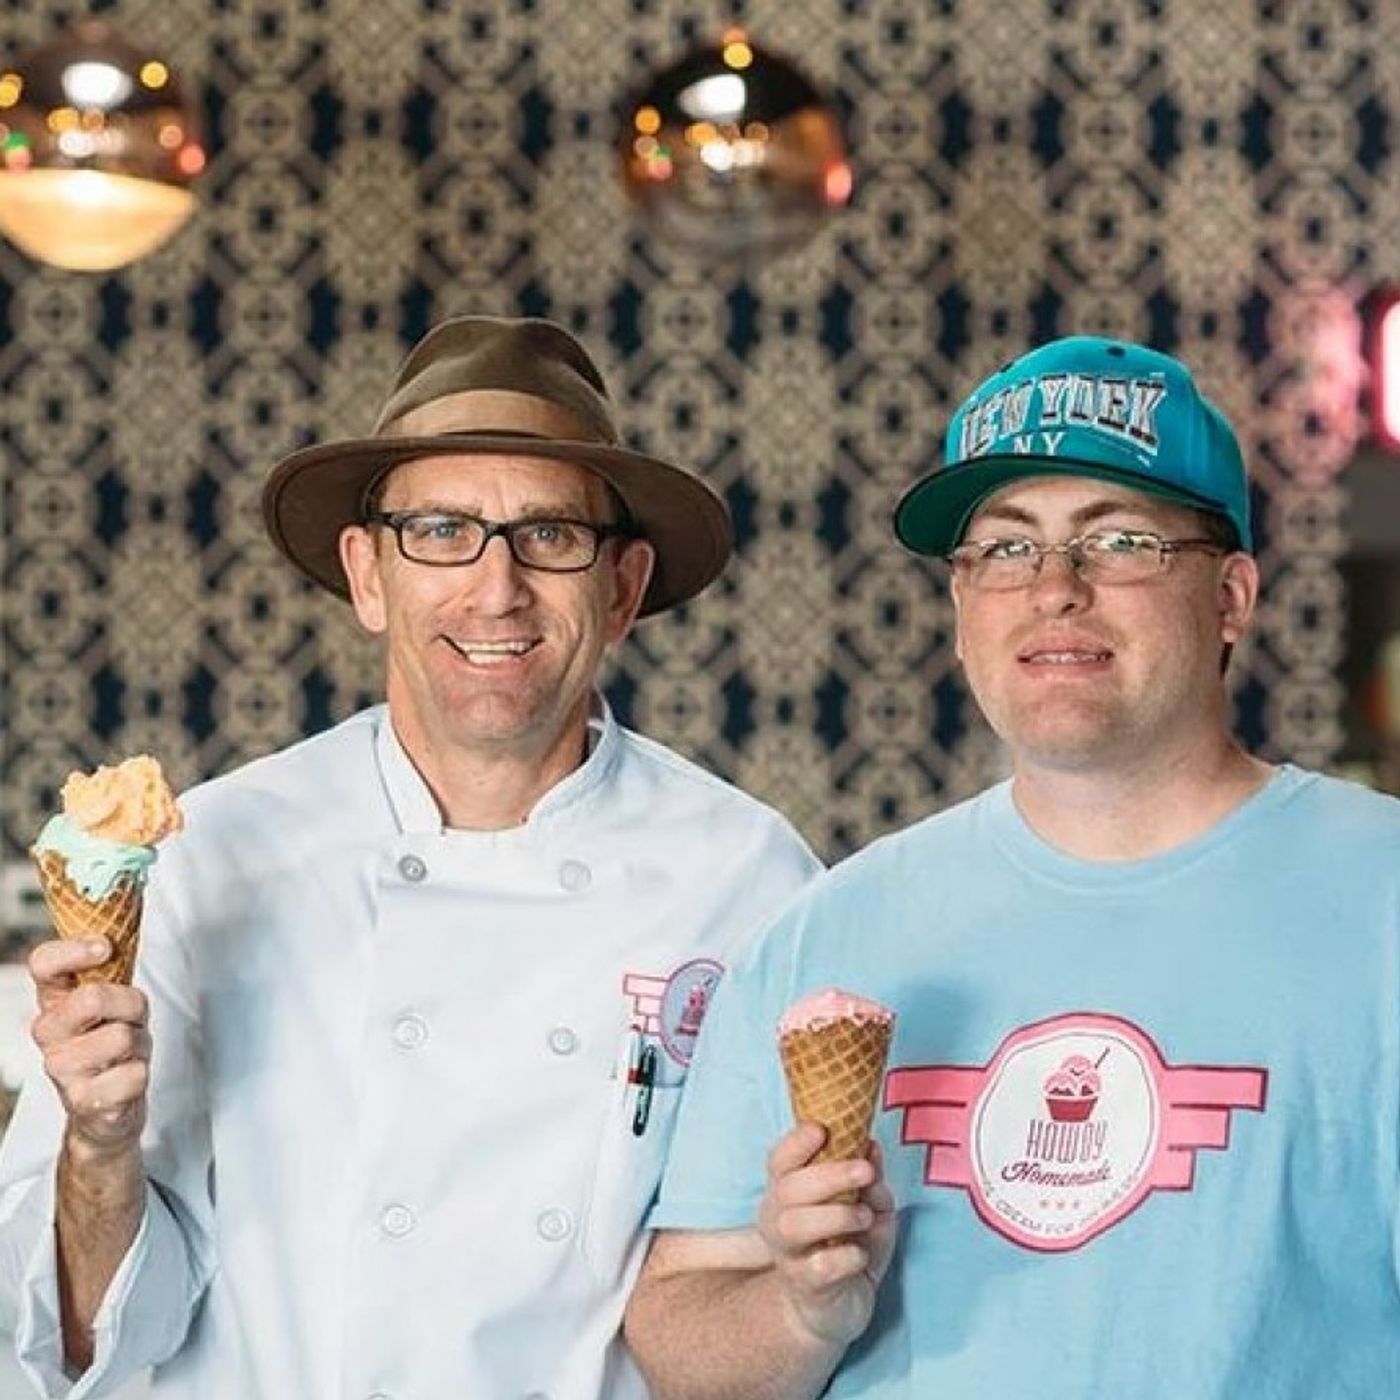 Dad To Dad 18 - Tom Landis of Dallas, TX Founder of Howdy's Homemade Ice Cream Hires and Trains Employees With Special Needs